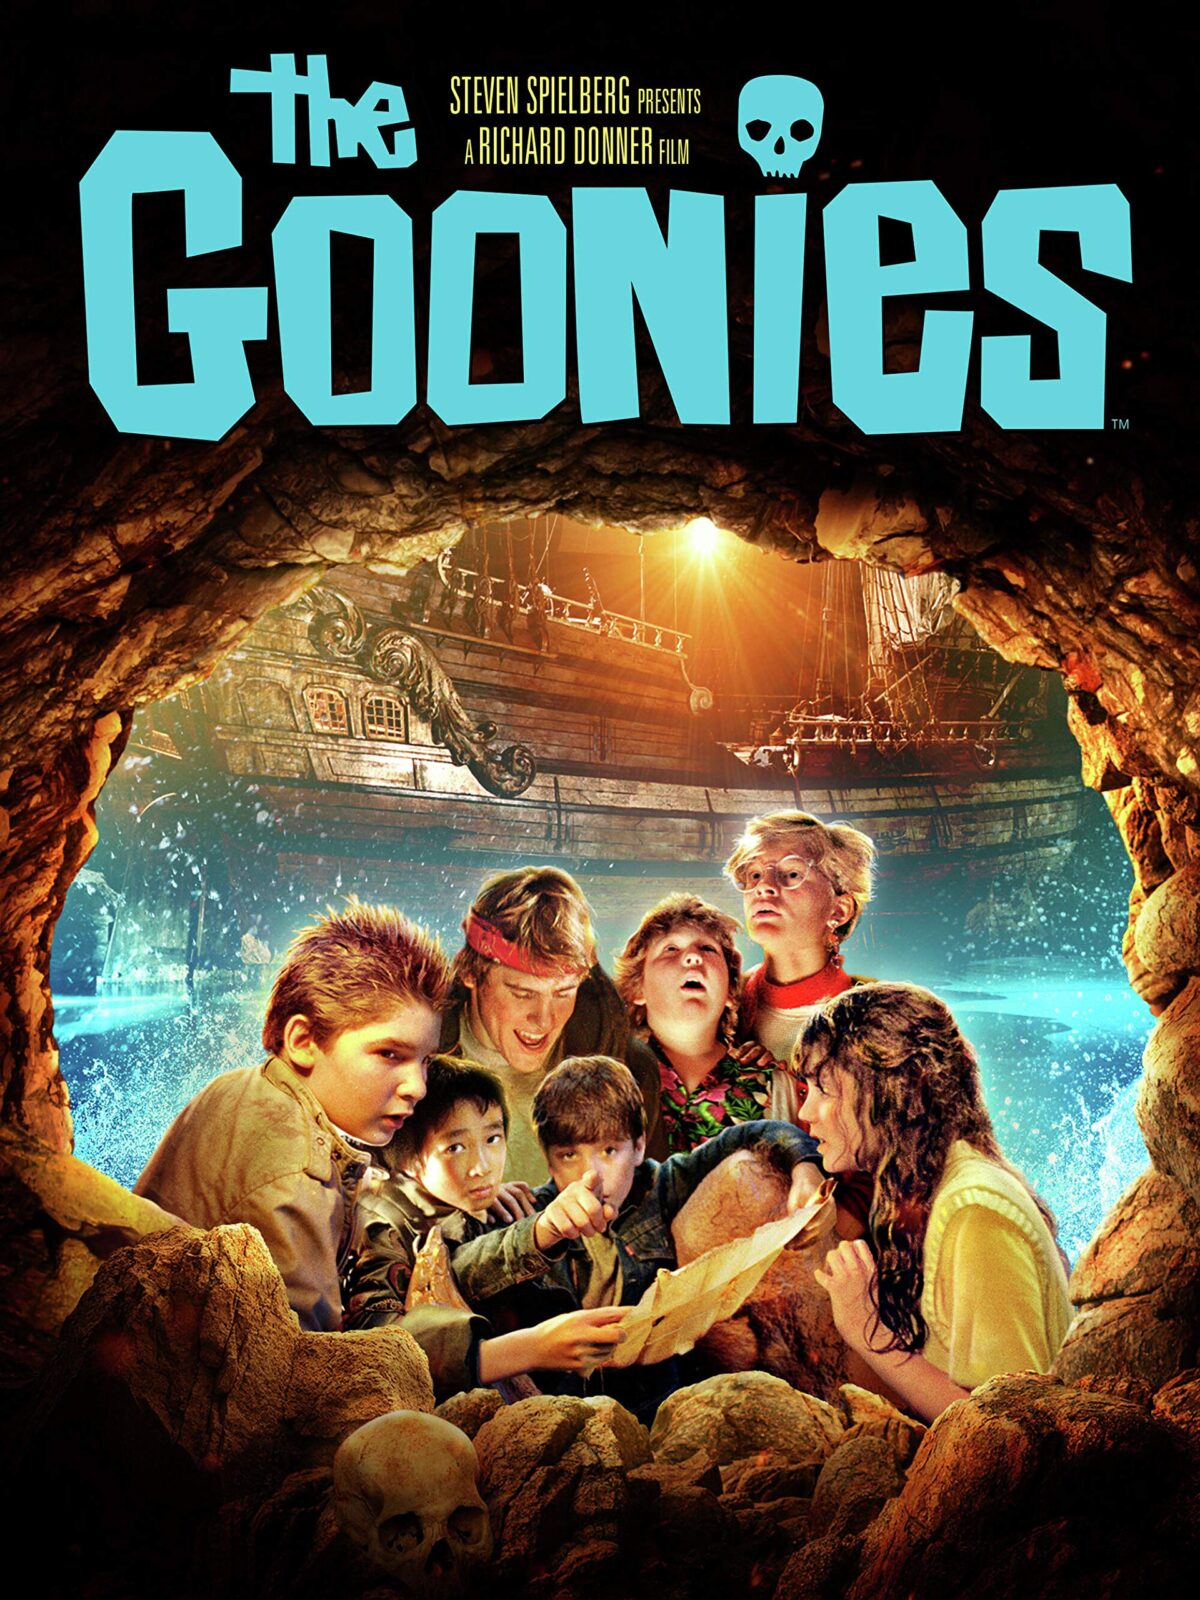 Movie poster for The Goonies featuring all of the Goonies characters looking at a map in a flooded cave in front of a pirate ship